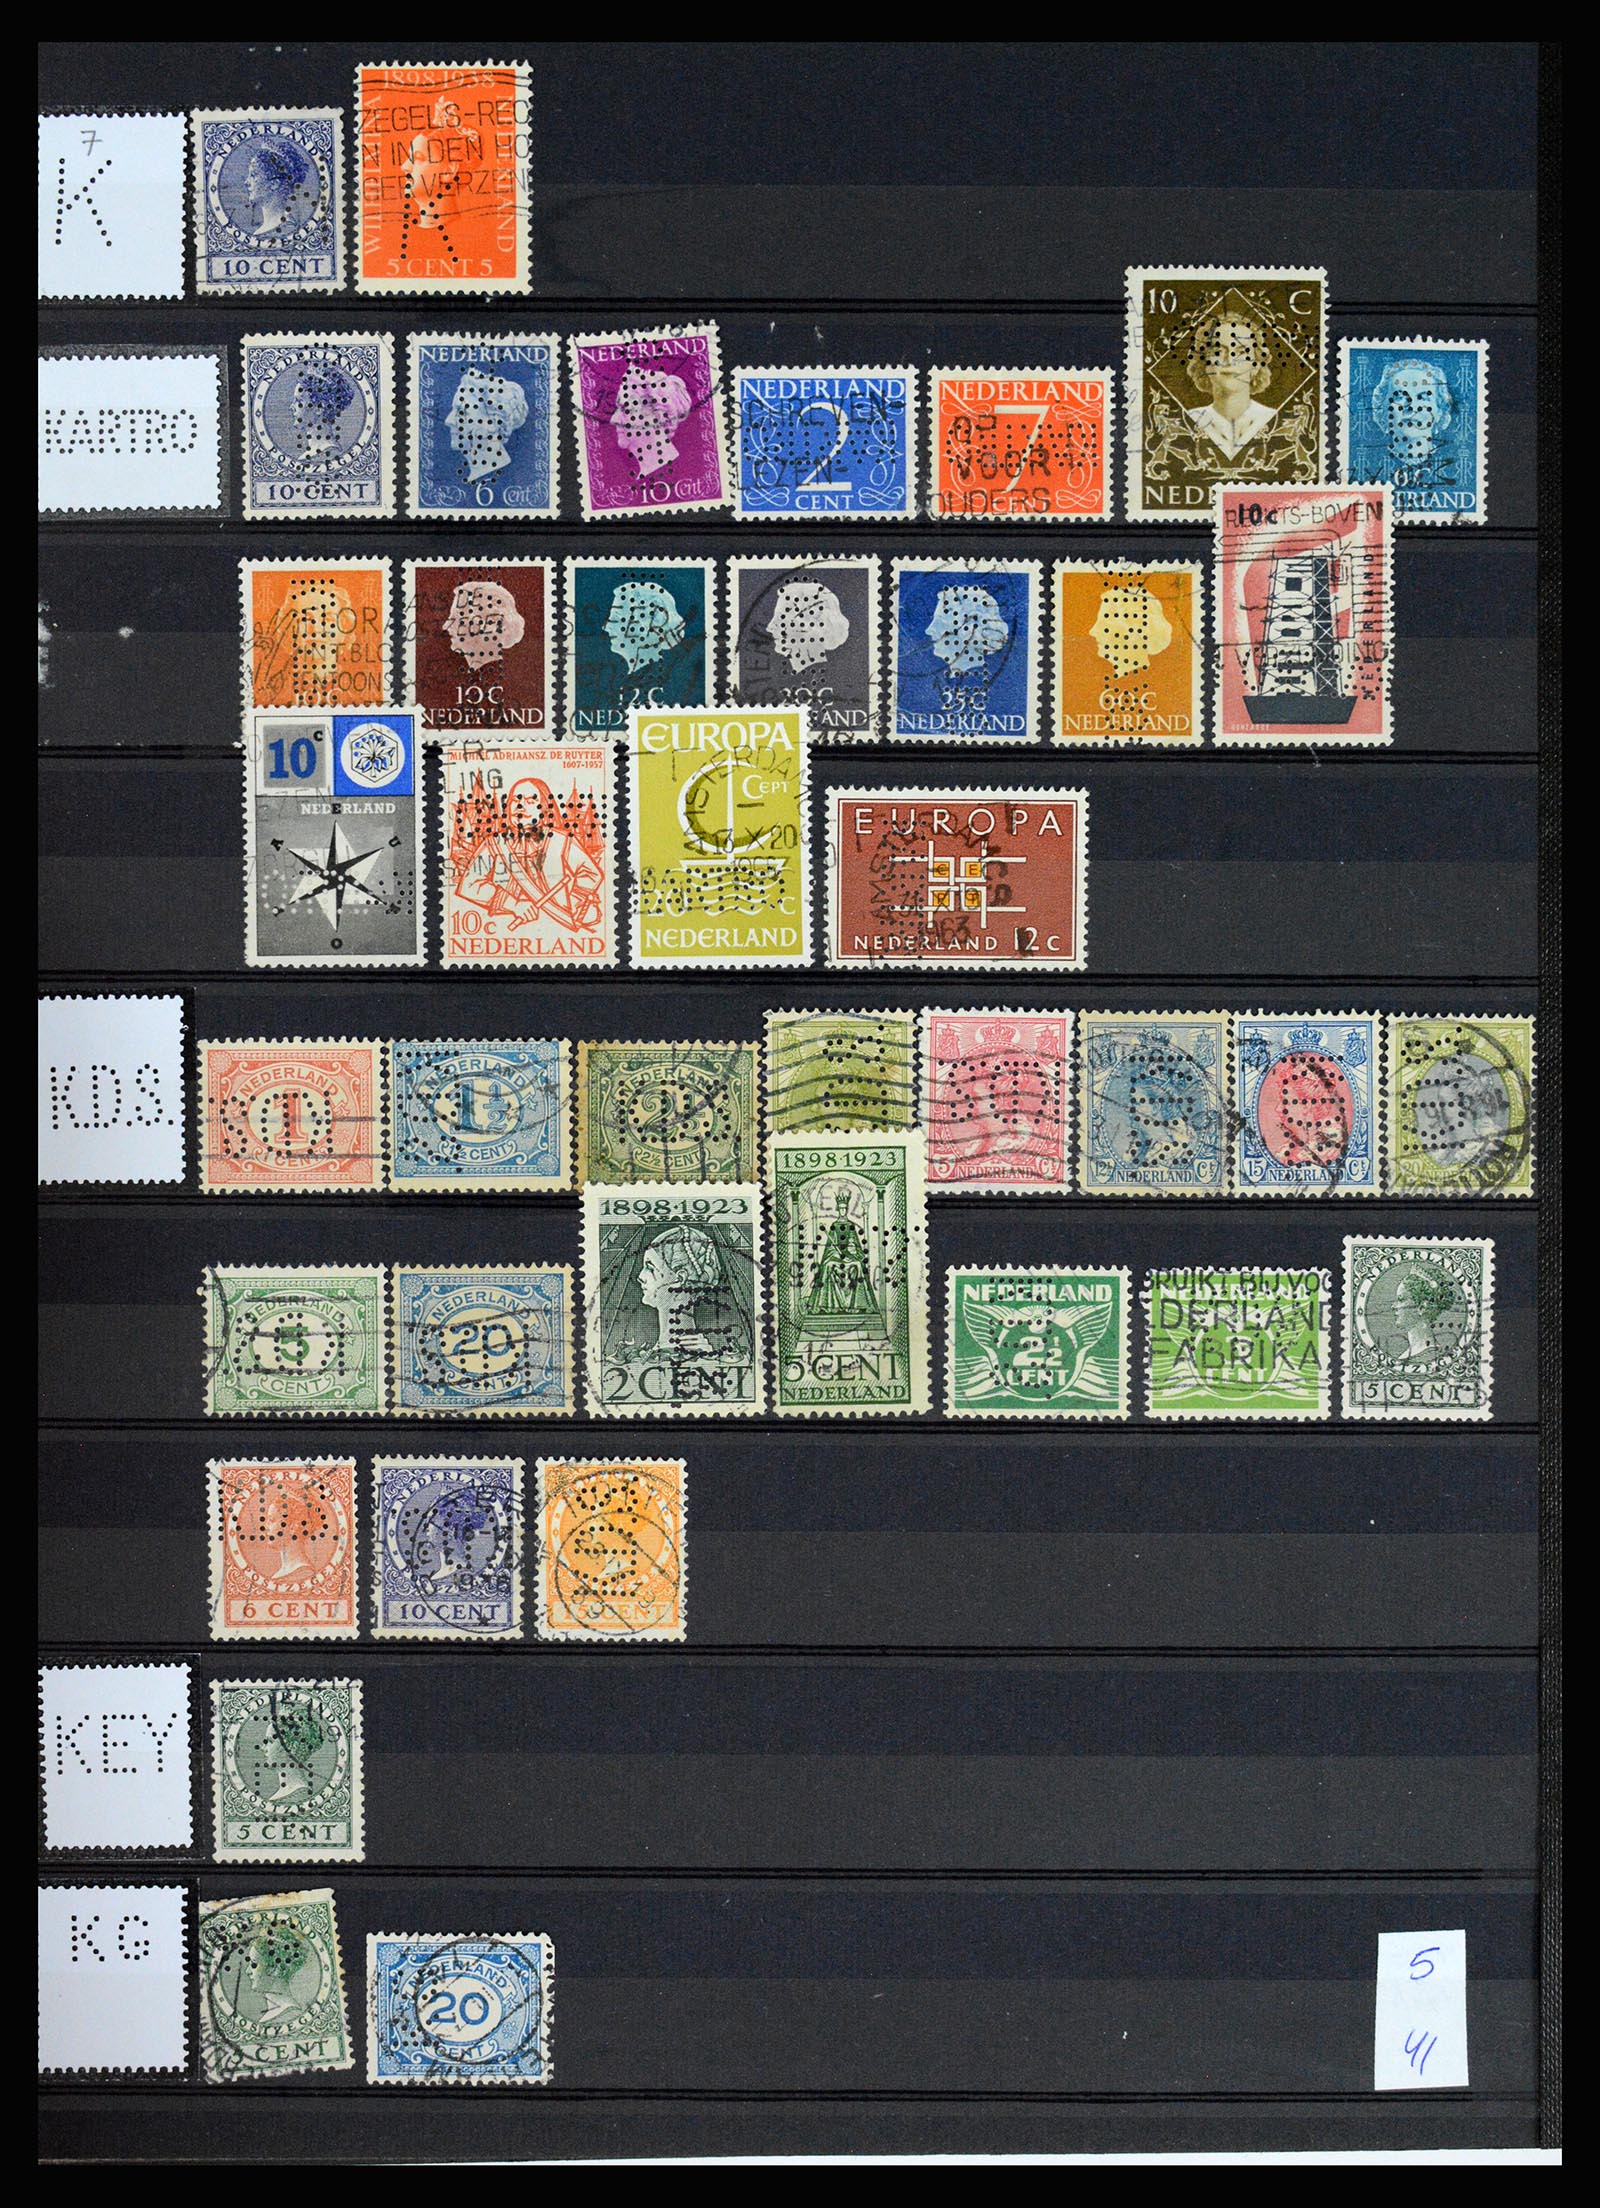 37183 027 - Stamp collection 37183 Netherlands perfins 1872-1960.